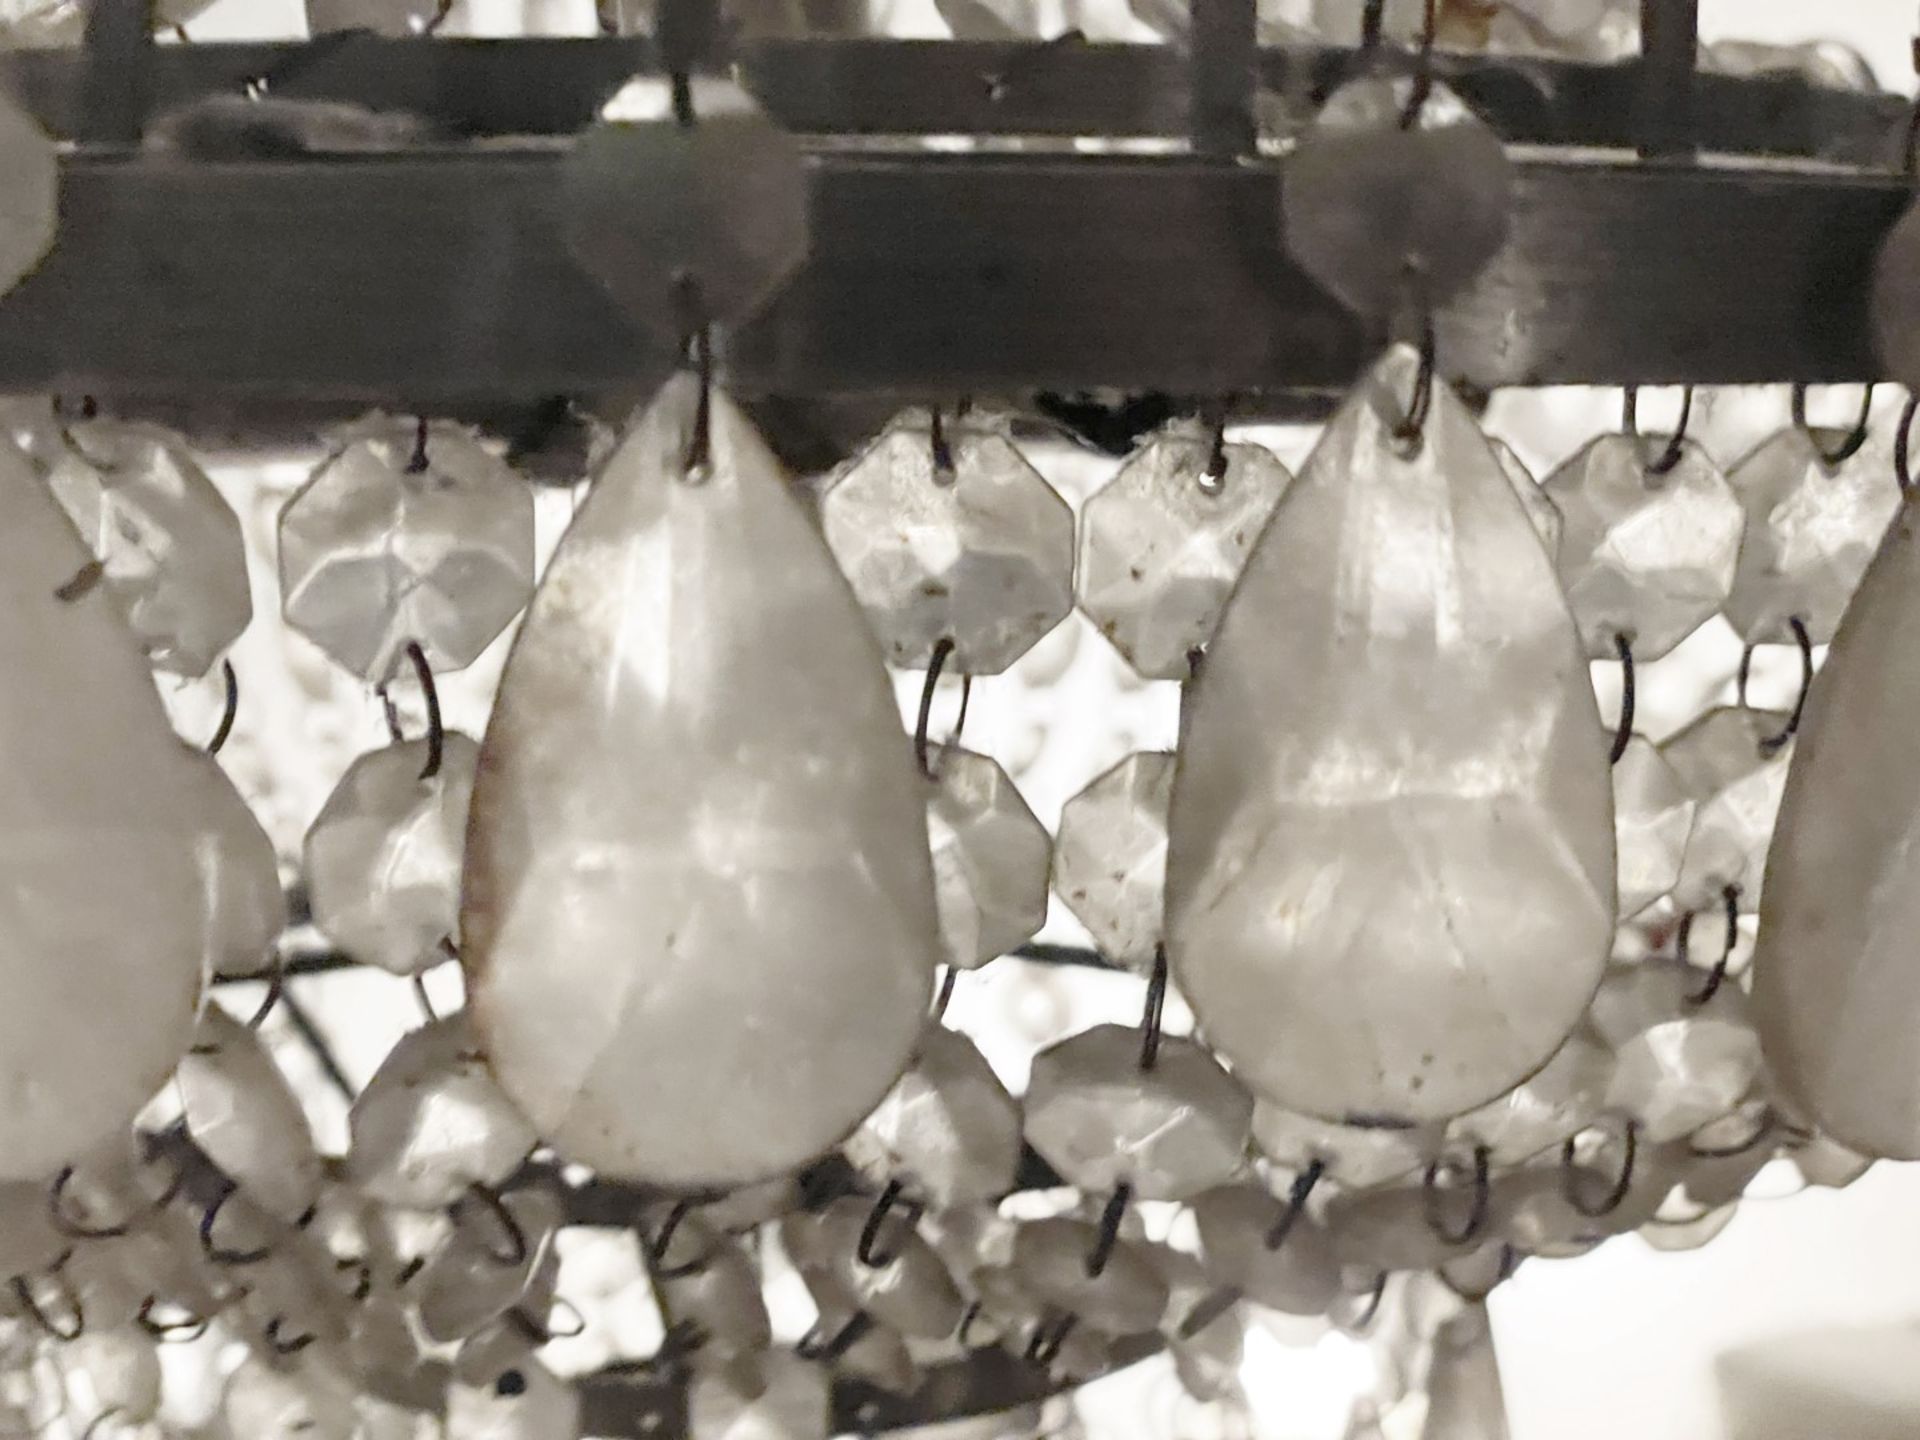 1 x Large Gustavian-style Chandelier Ceiling Pendant Light Adorned with Clear Droplets - Image 7 of 9